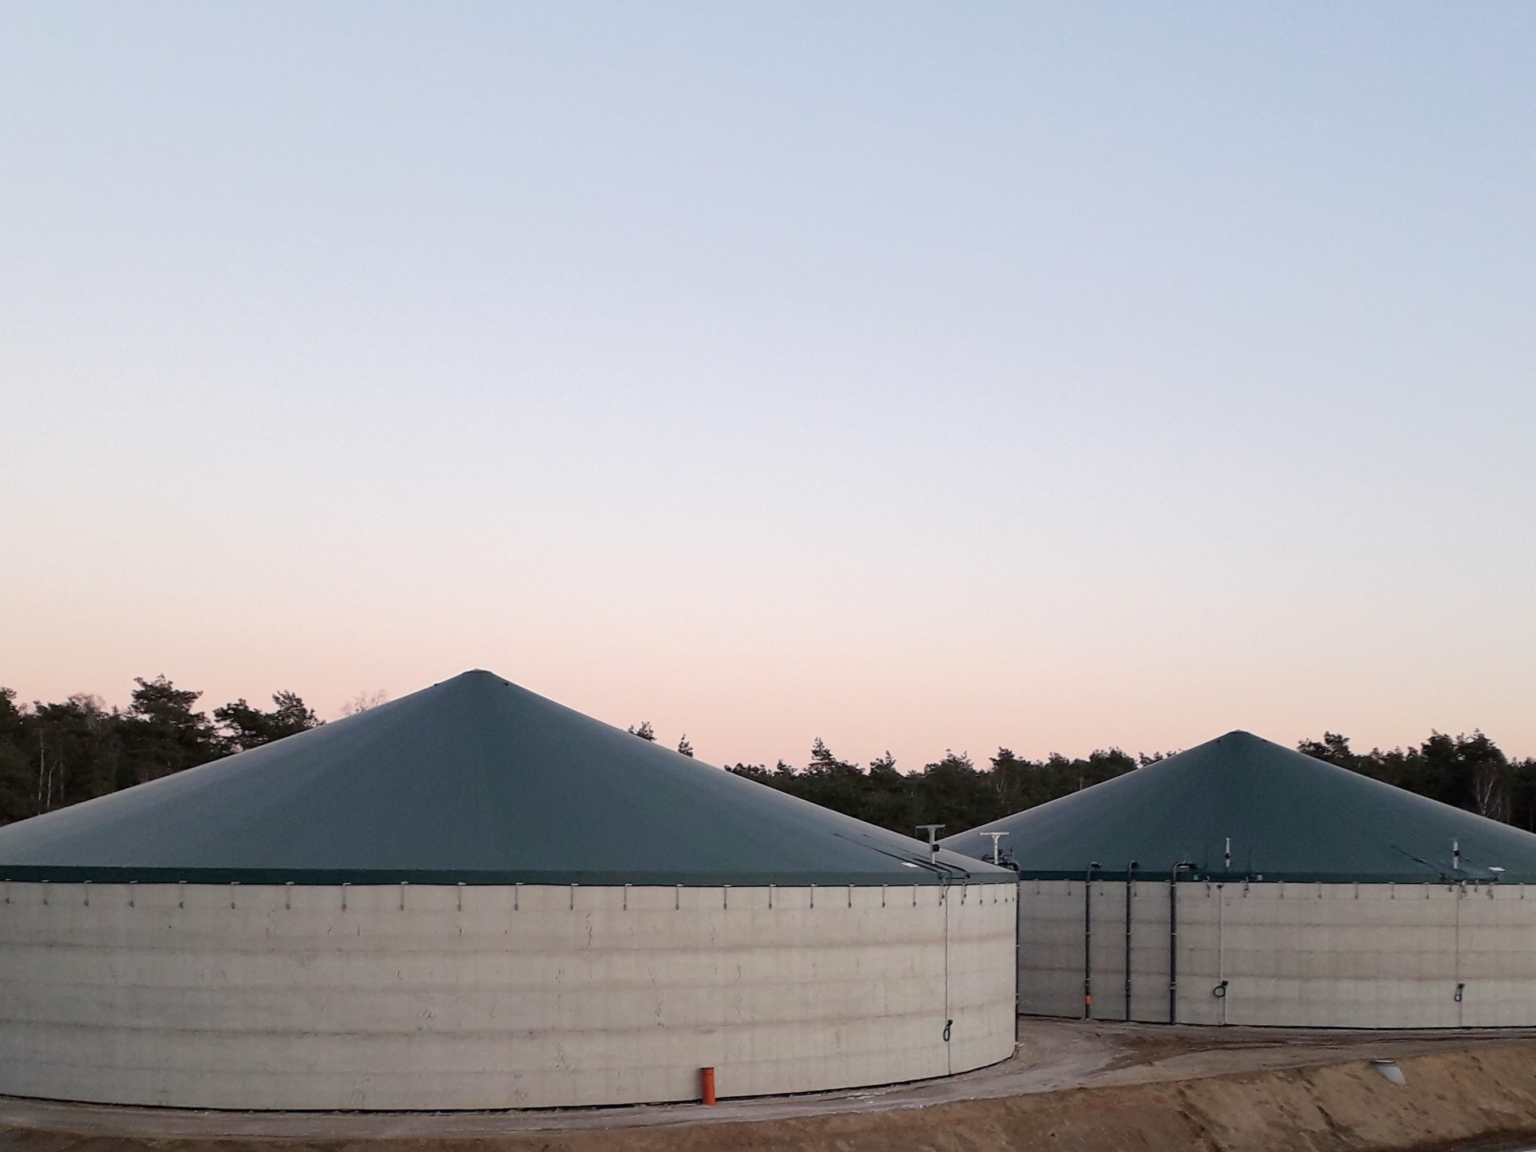 Two tensioned covers on concrete silos